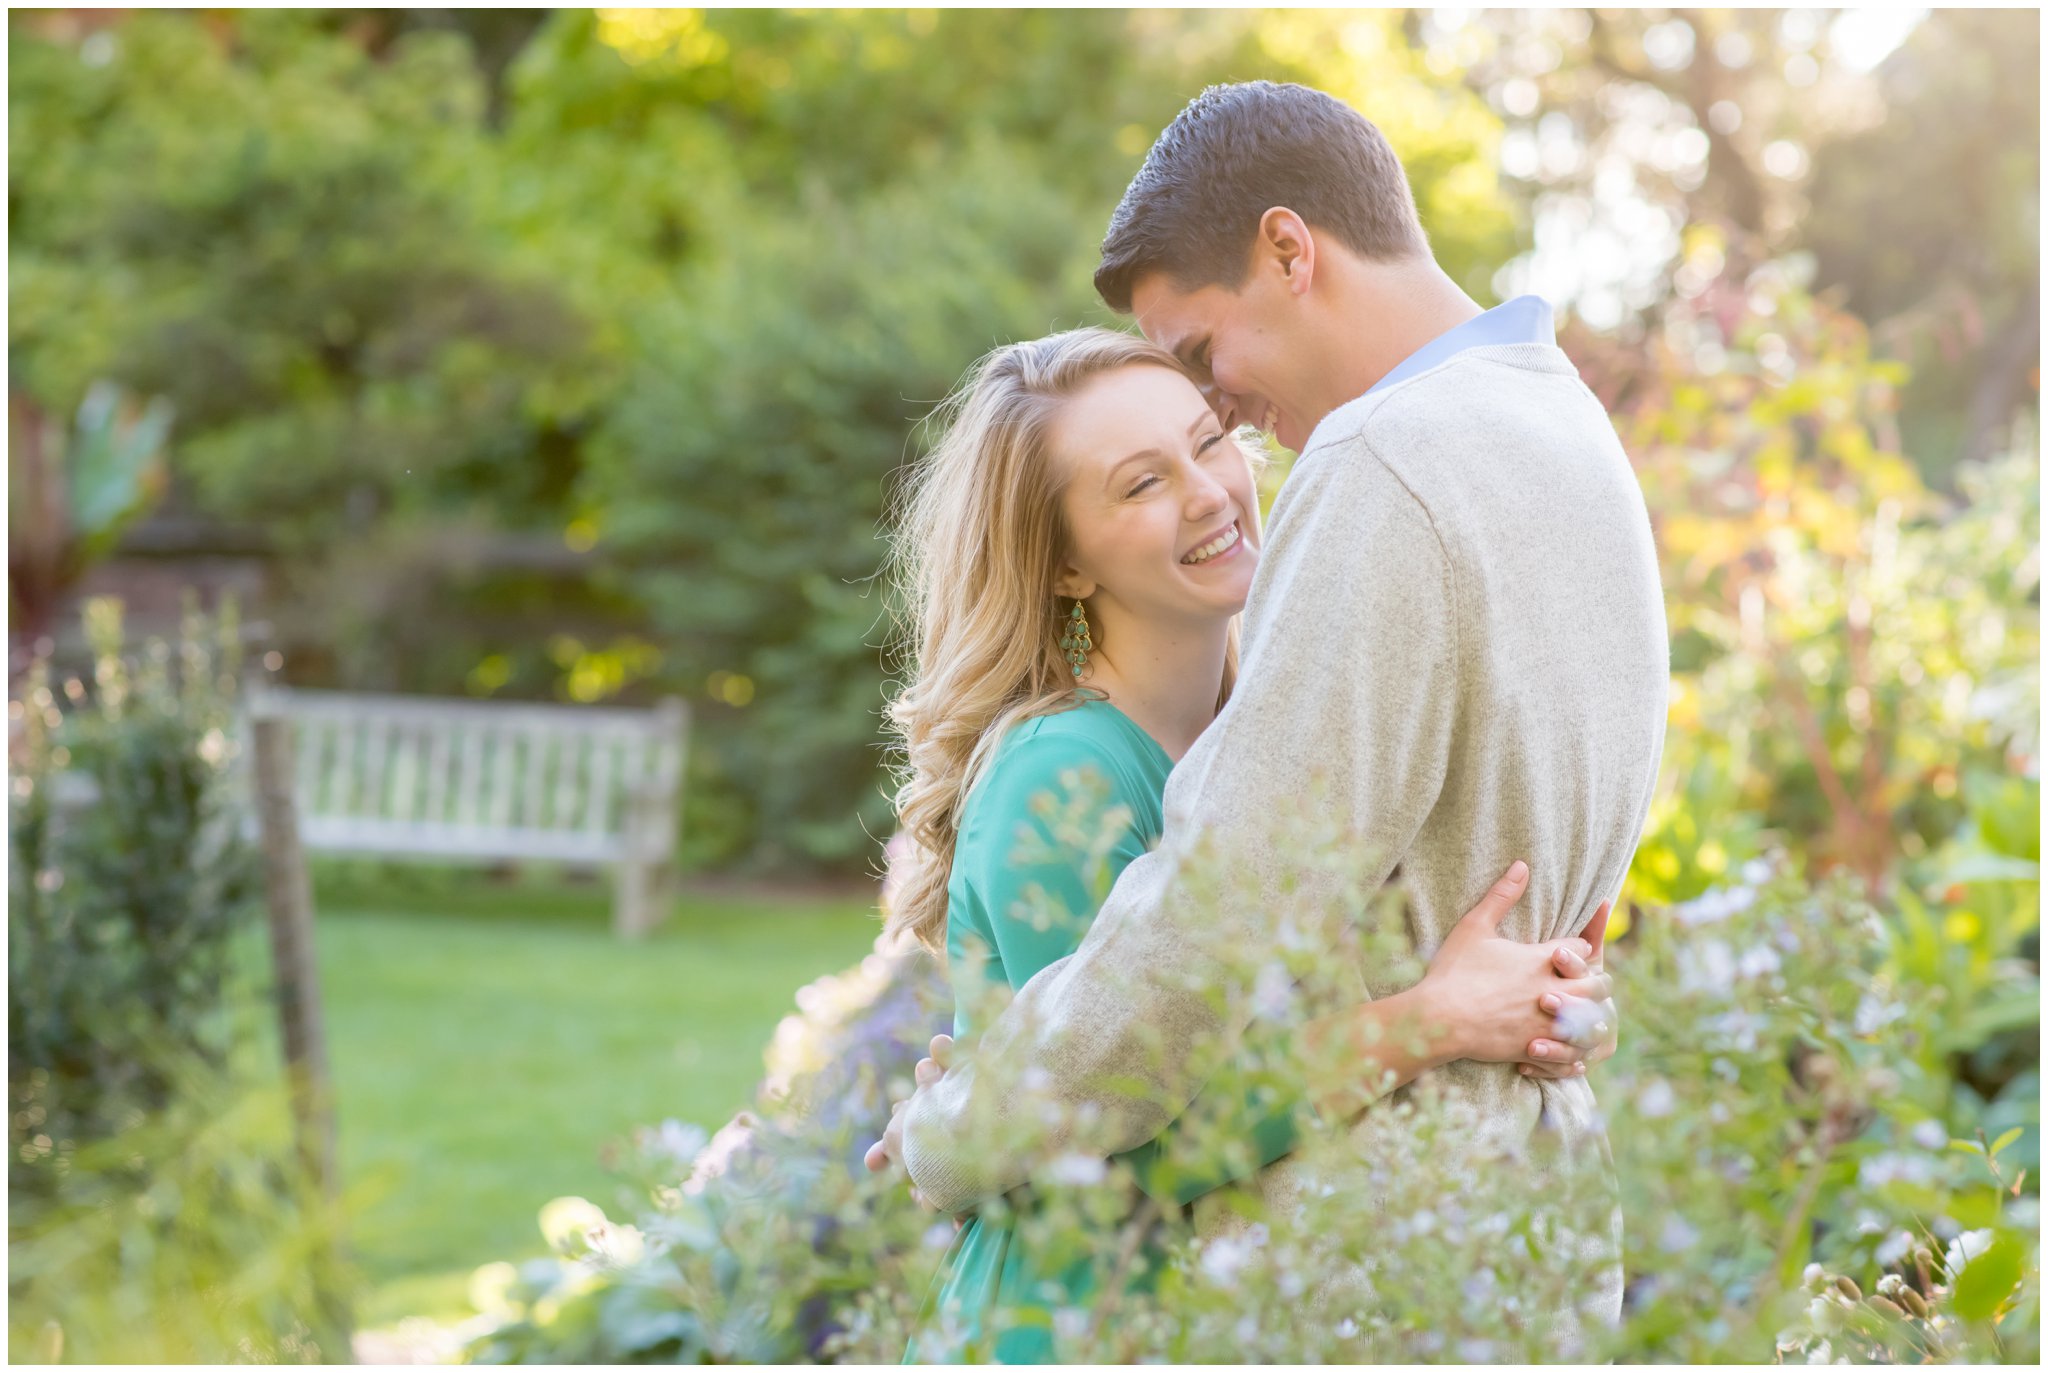 Laura Lee Photography_ Best of 2015 Engagements_0034